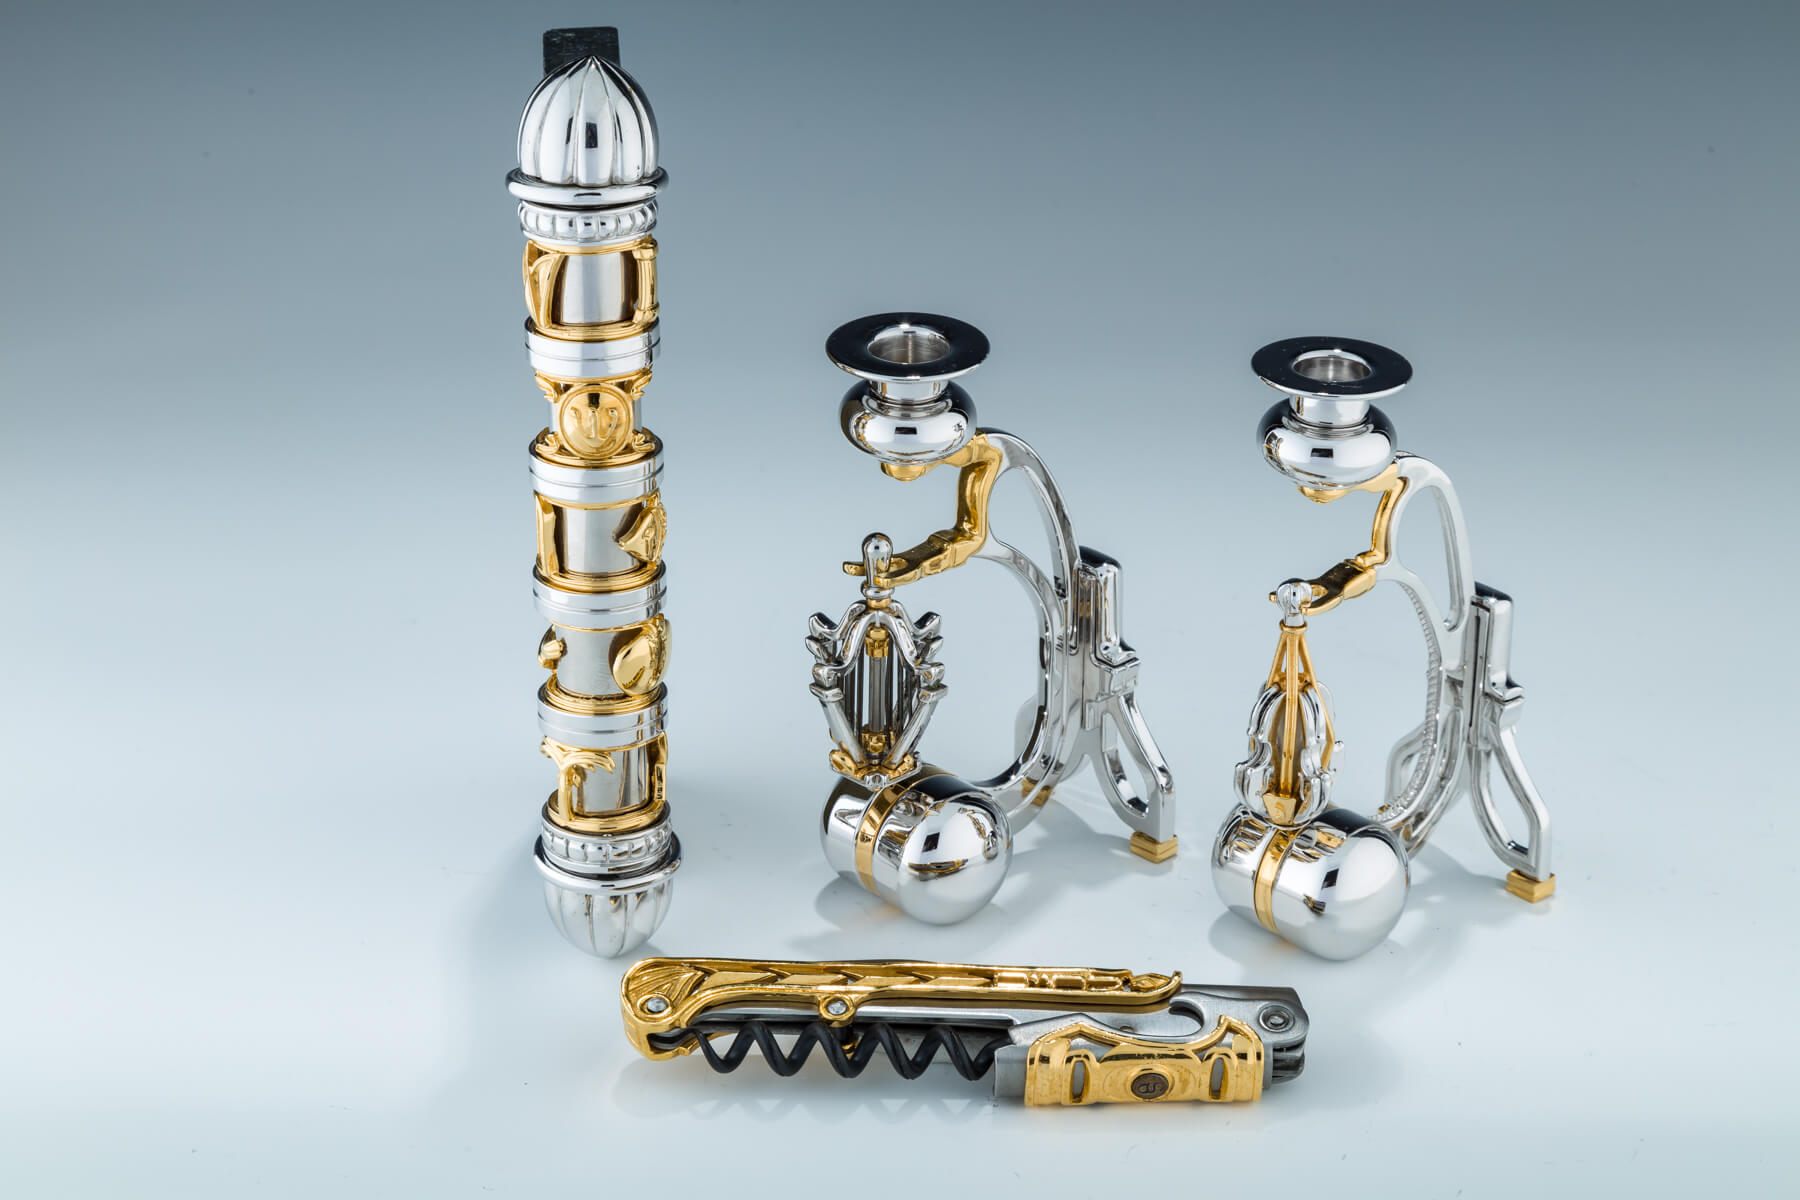 94. A Group Of Four Judaica Items By Swed Master Silversmiths